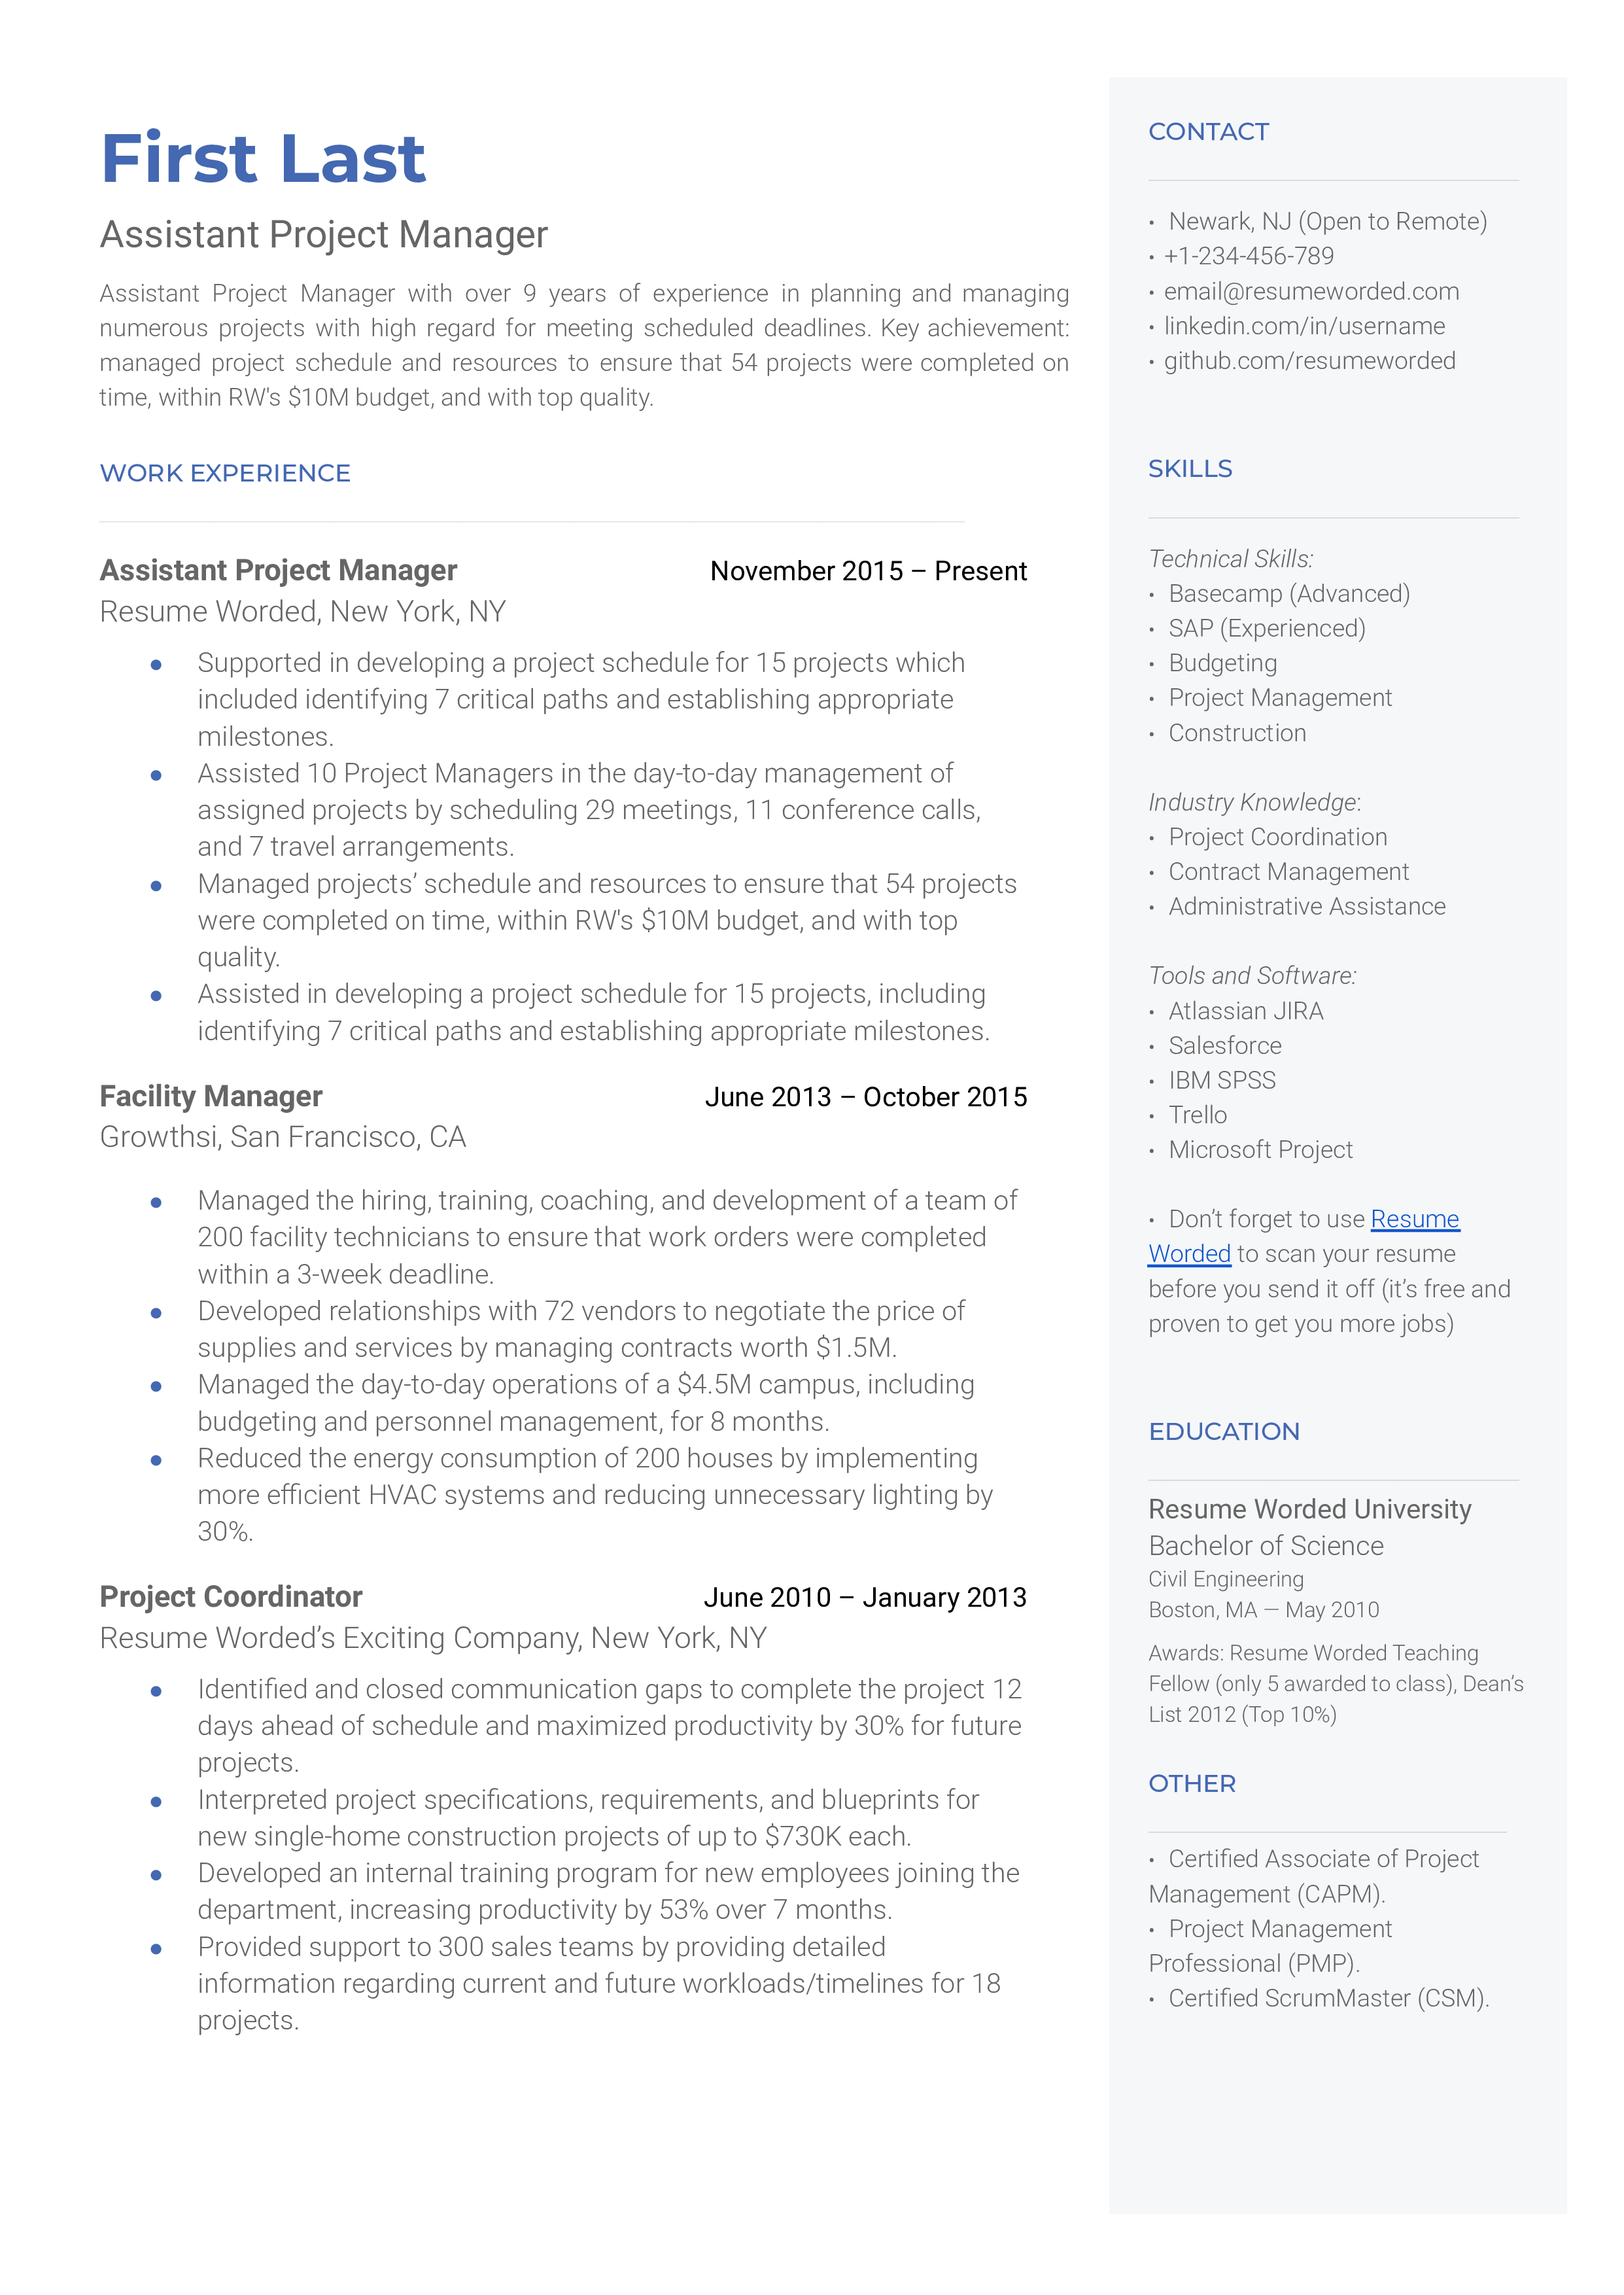 A CV tailored for an Assistant Project Manager showcasing remote project experience and adaptability.